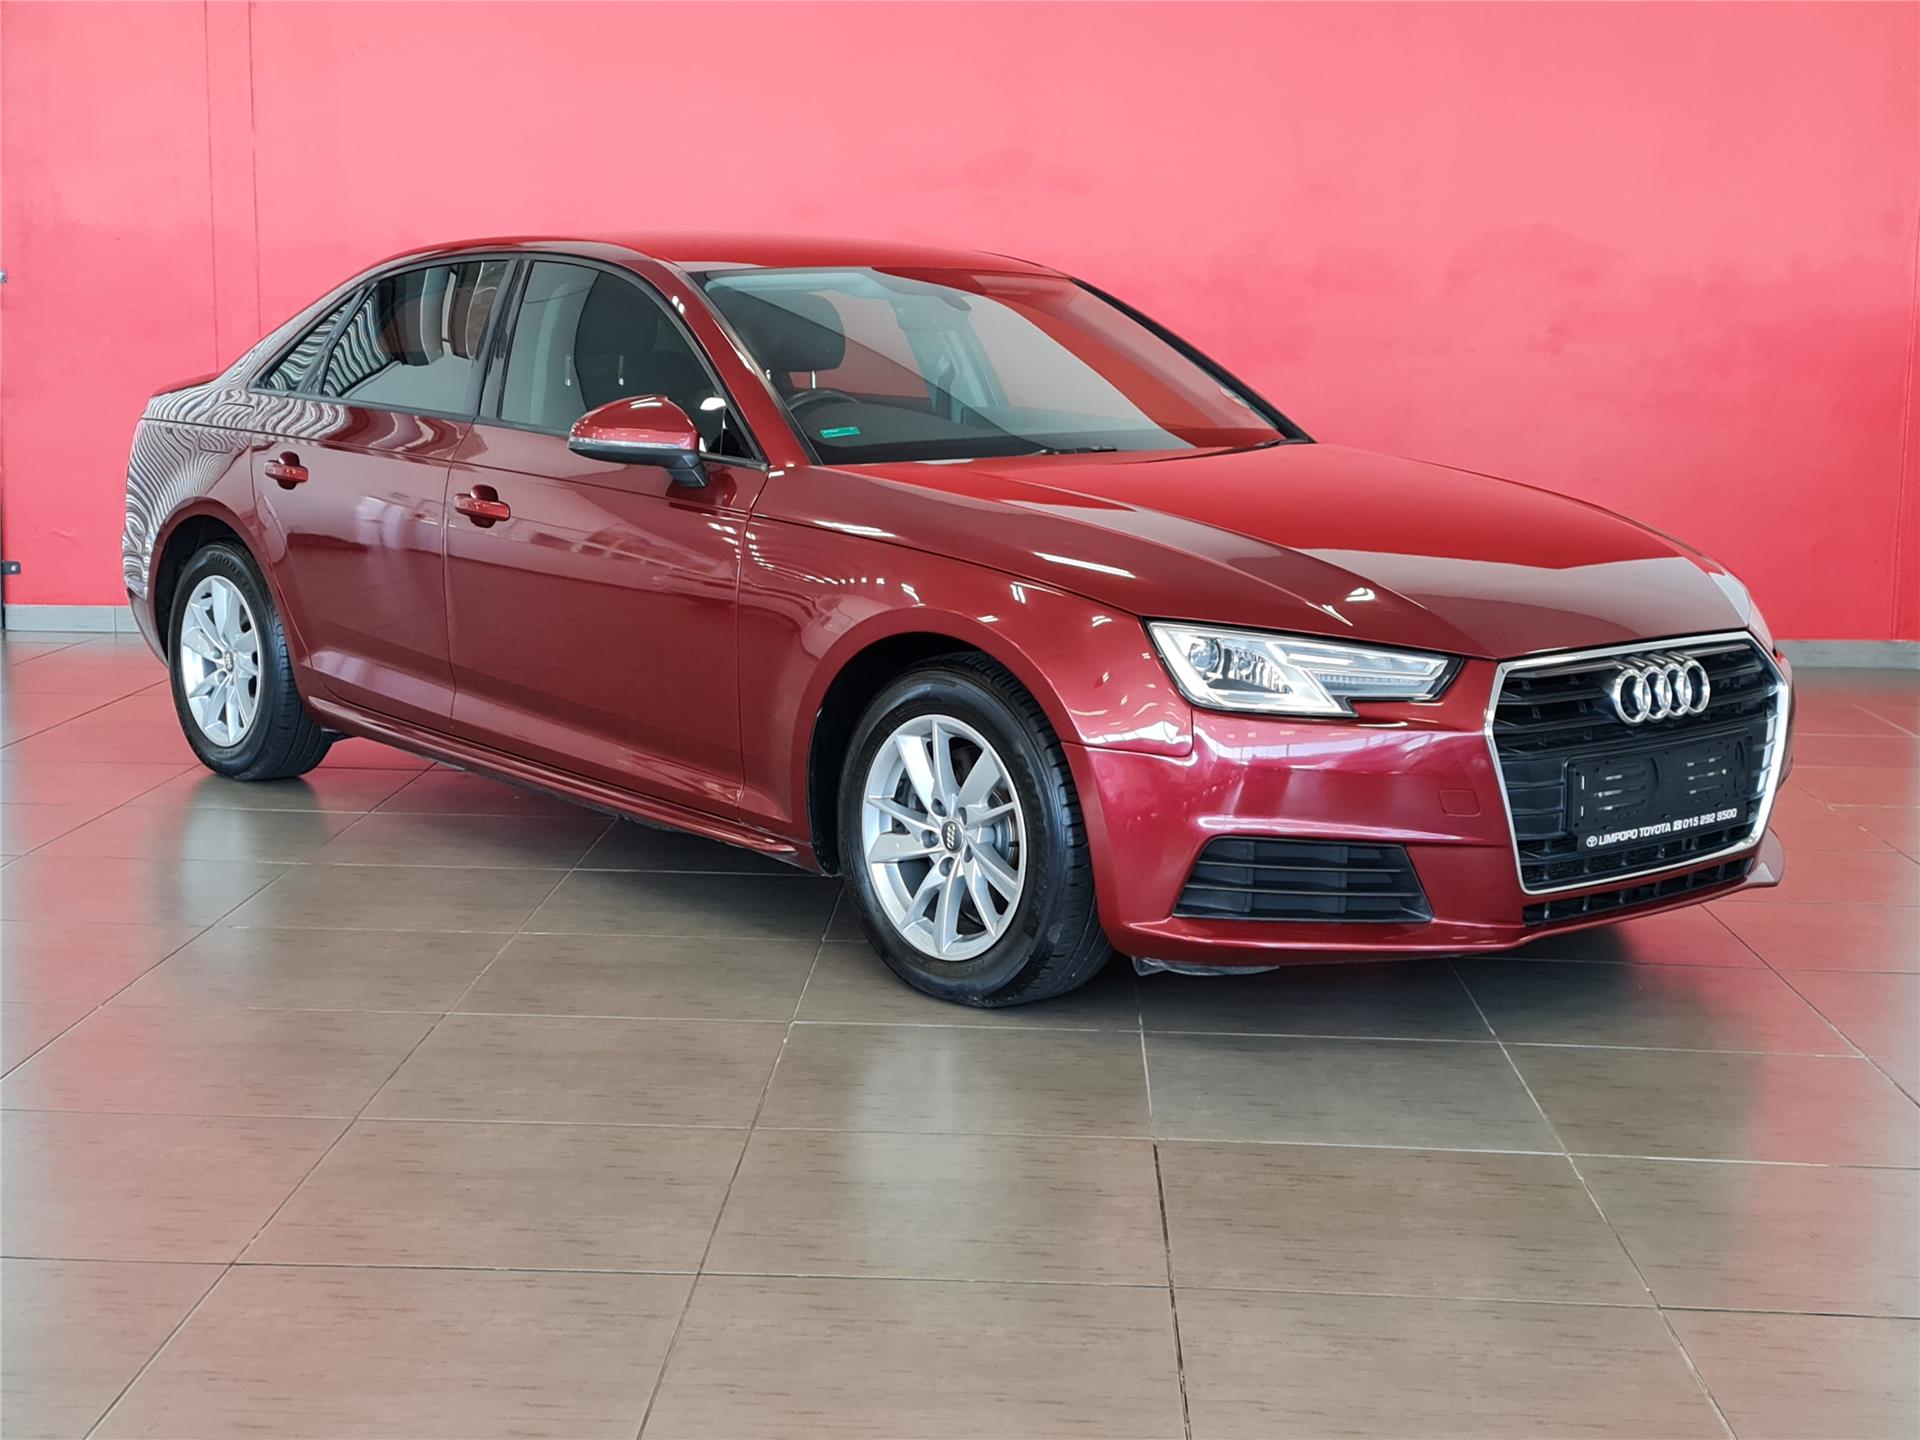 2016 Audi A4  for sale - 1054236/1